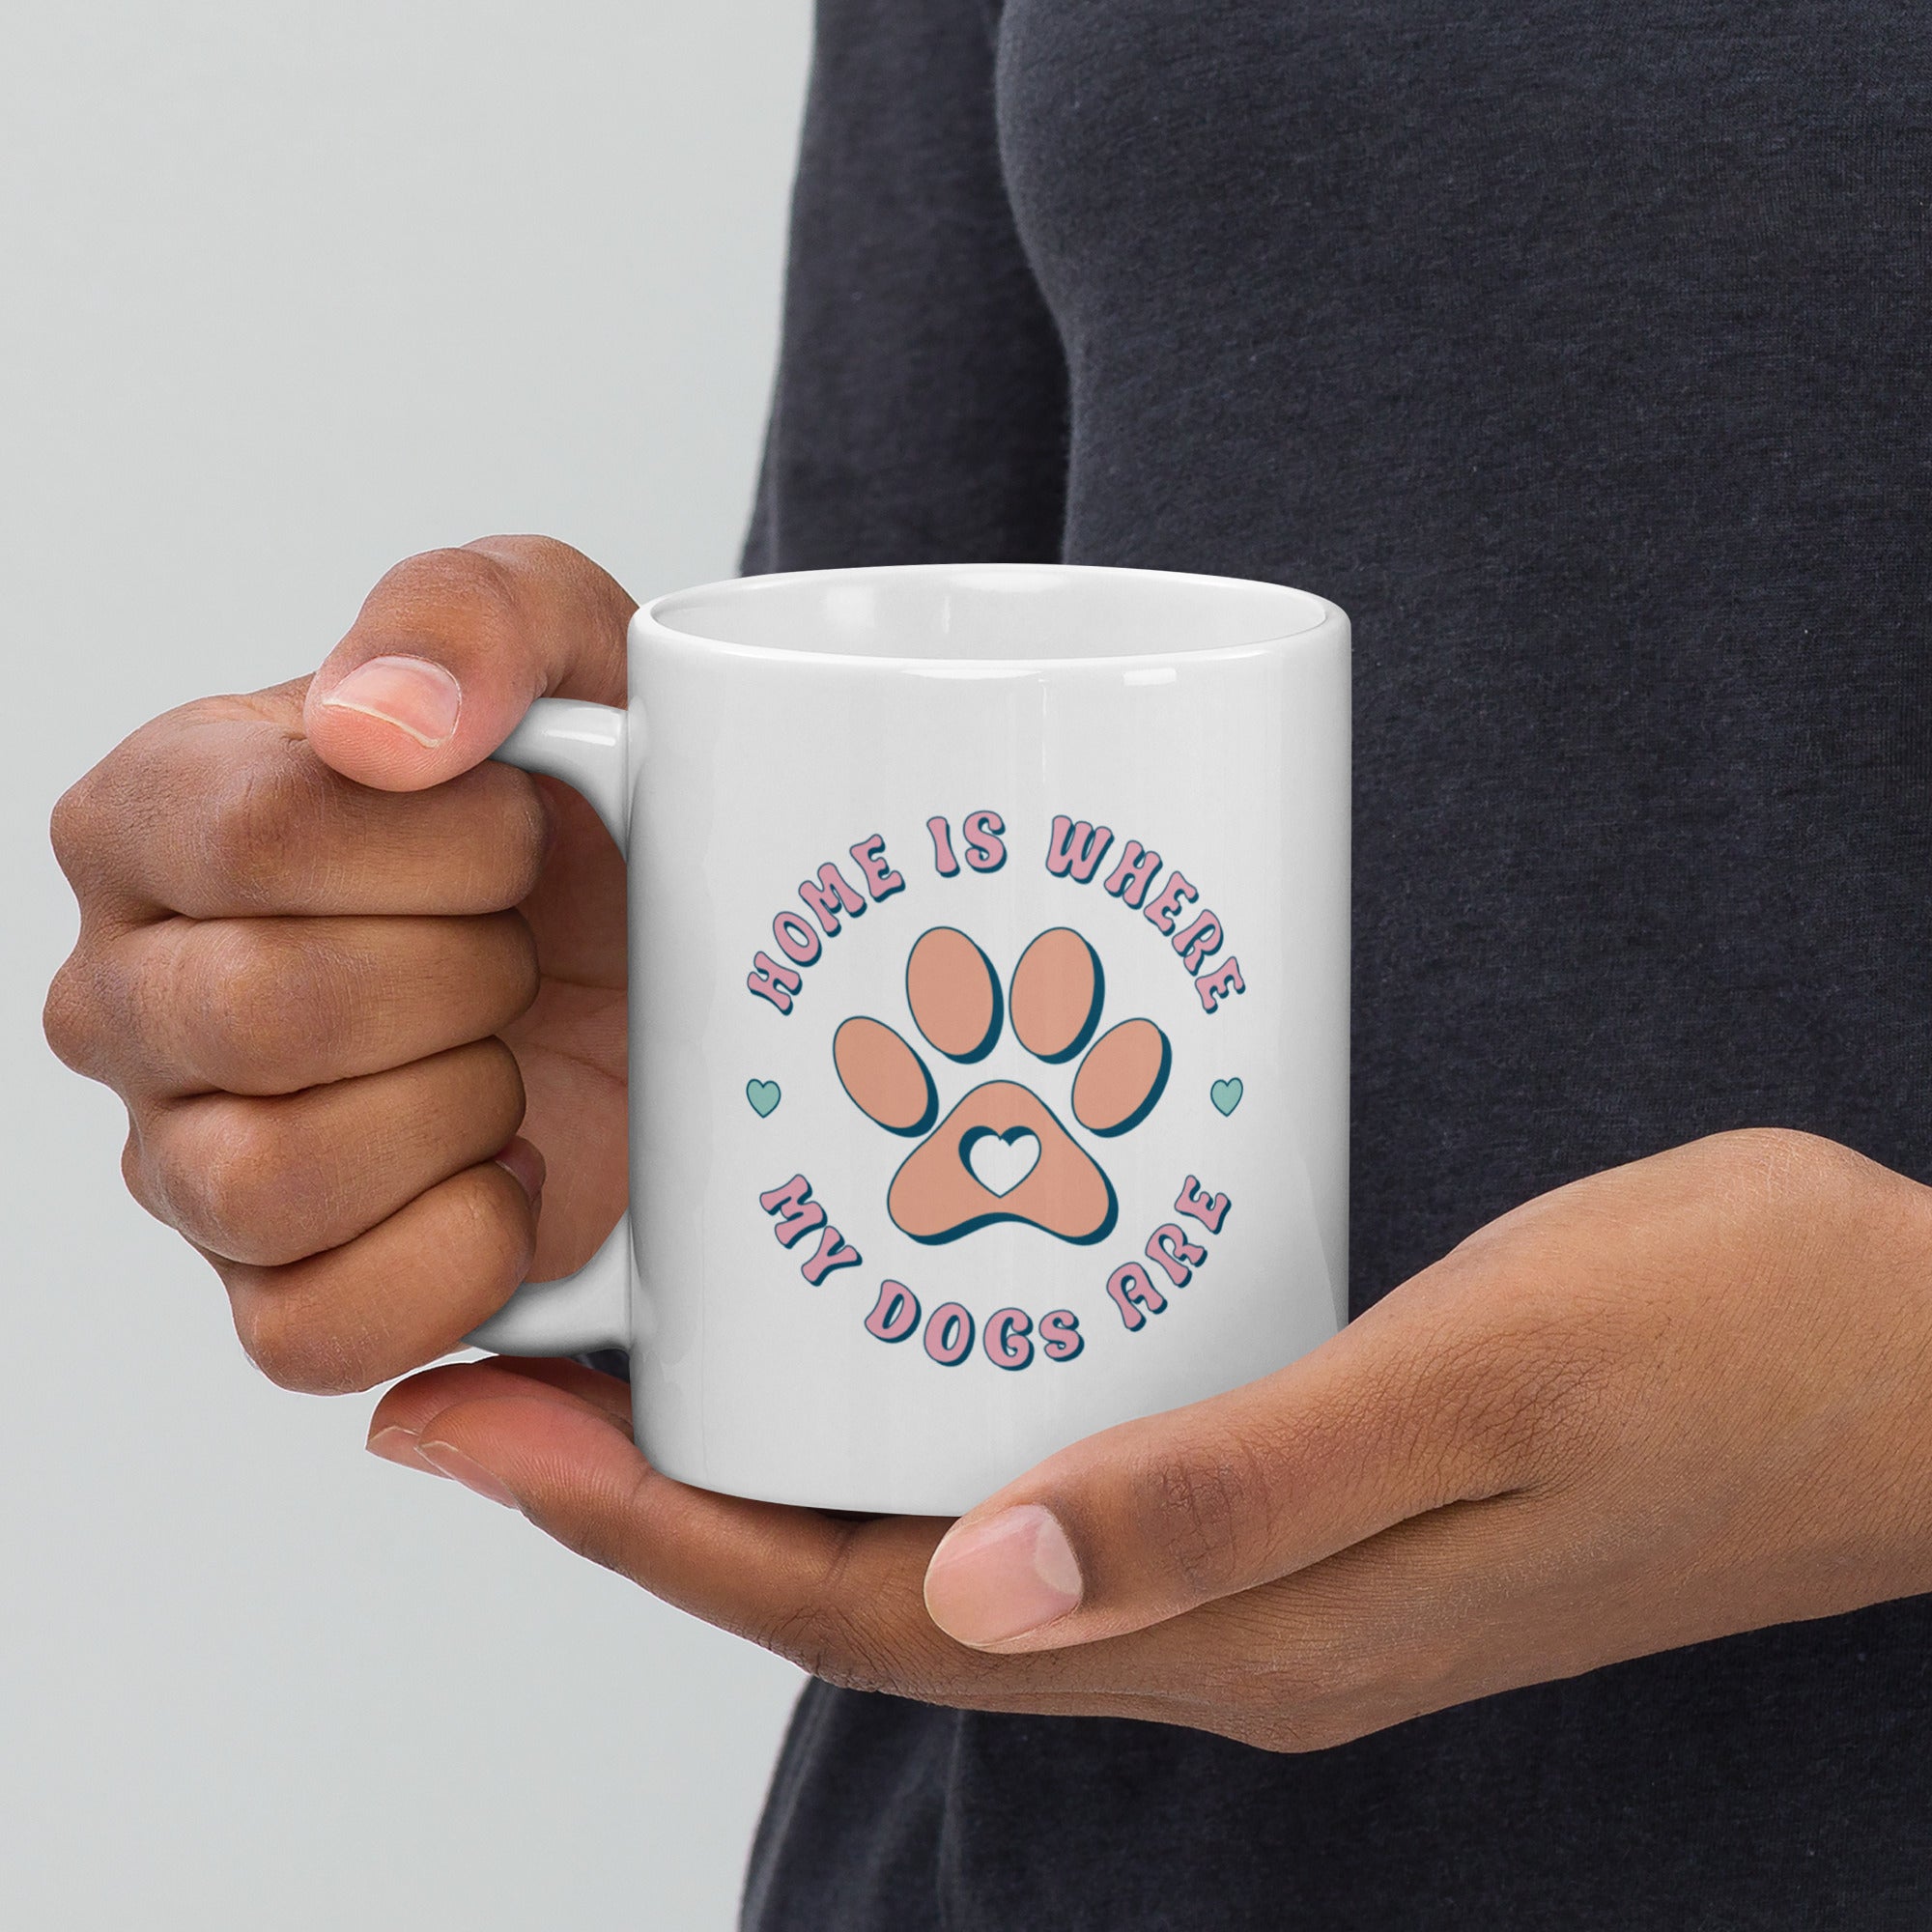 Tasse "Home is where your Dogs are"